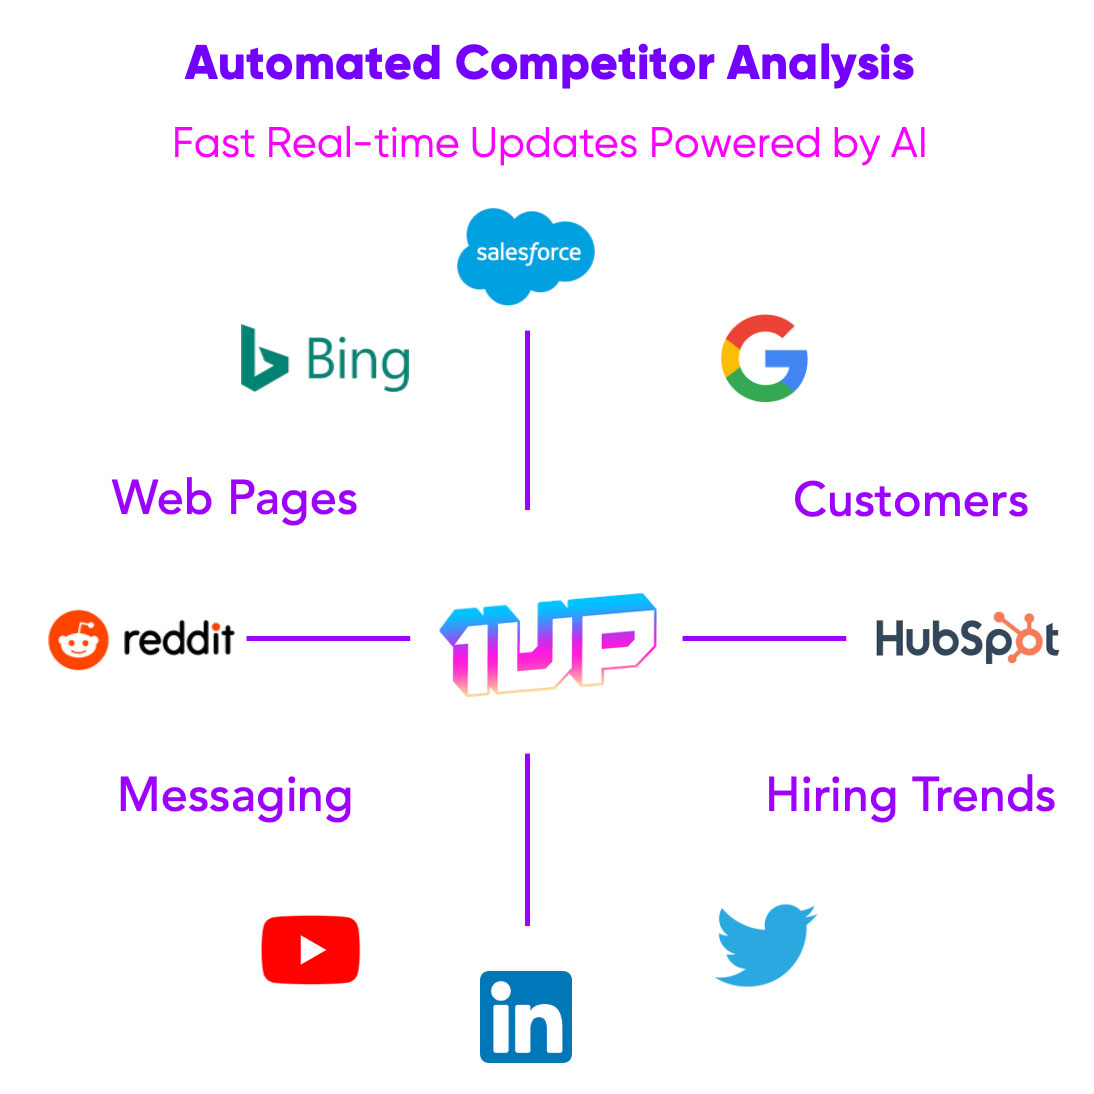 Automated Competitor Analysis